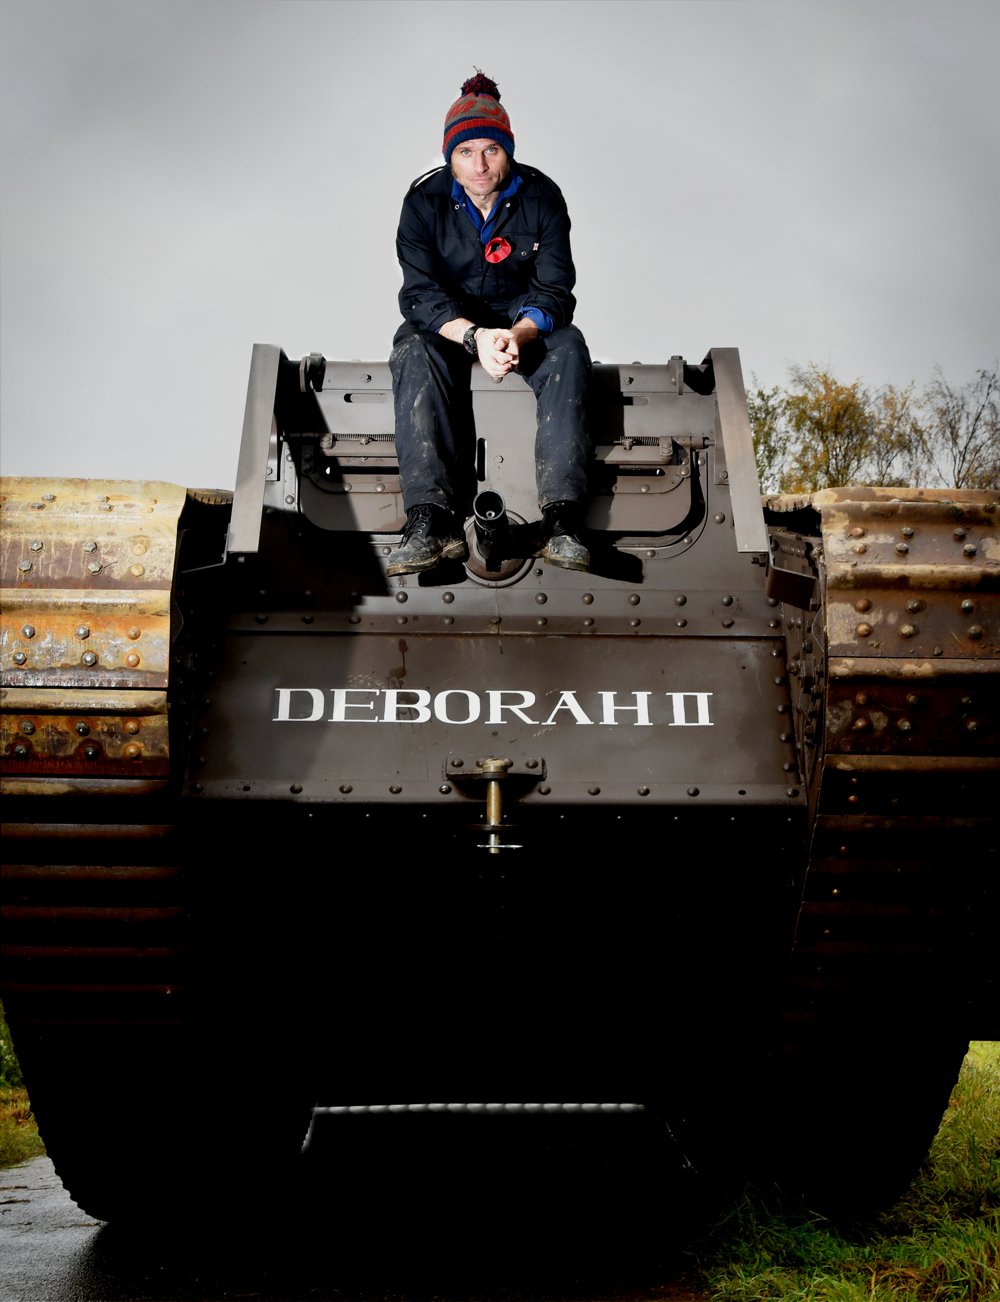 The replica tank itself will return to the UK and will remain at the Norfolk Museum. There it will form the centrepiece of an impressive World War One display and act as a lasting tribute to the brave crews who lost their lives in the conflict.